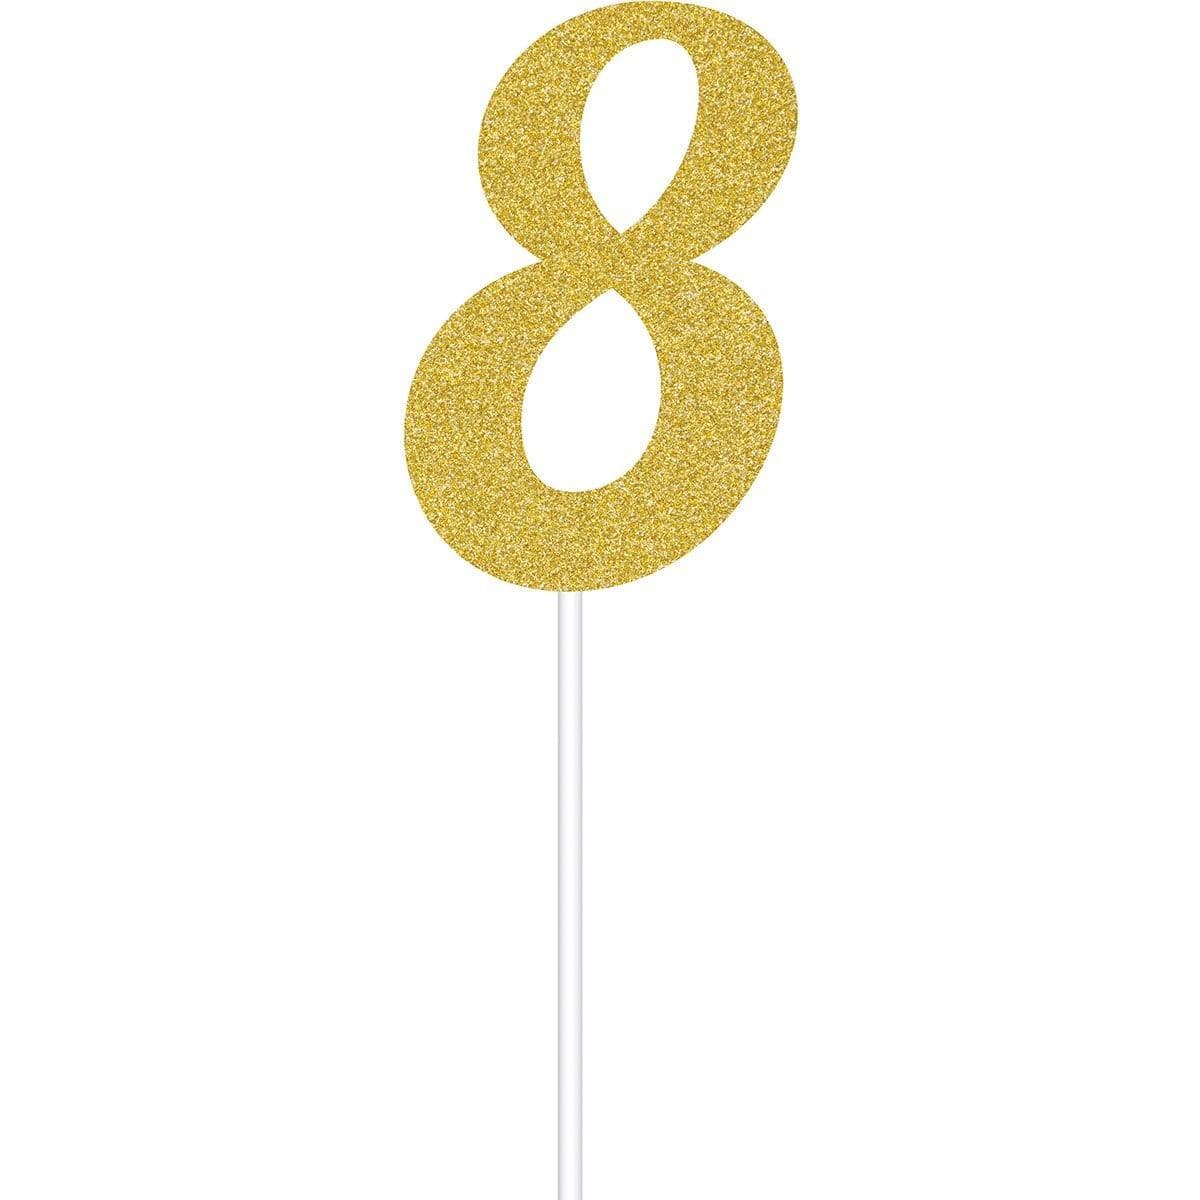 Buy Cake Supplies Cake Topper 8 Glitter 6 In. - Gold sold at Party Expert